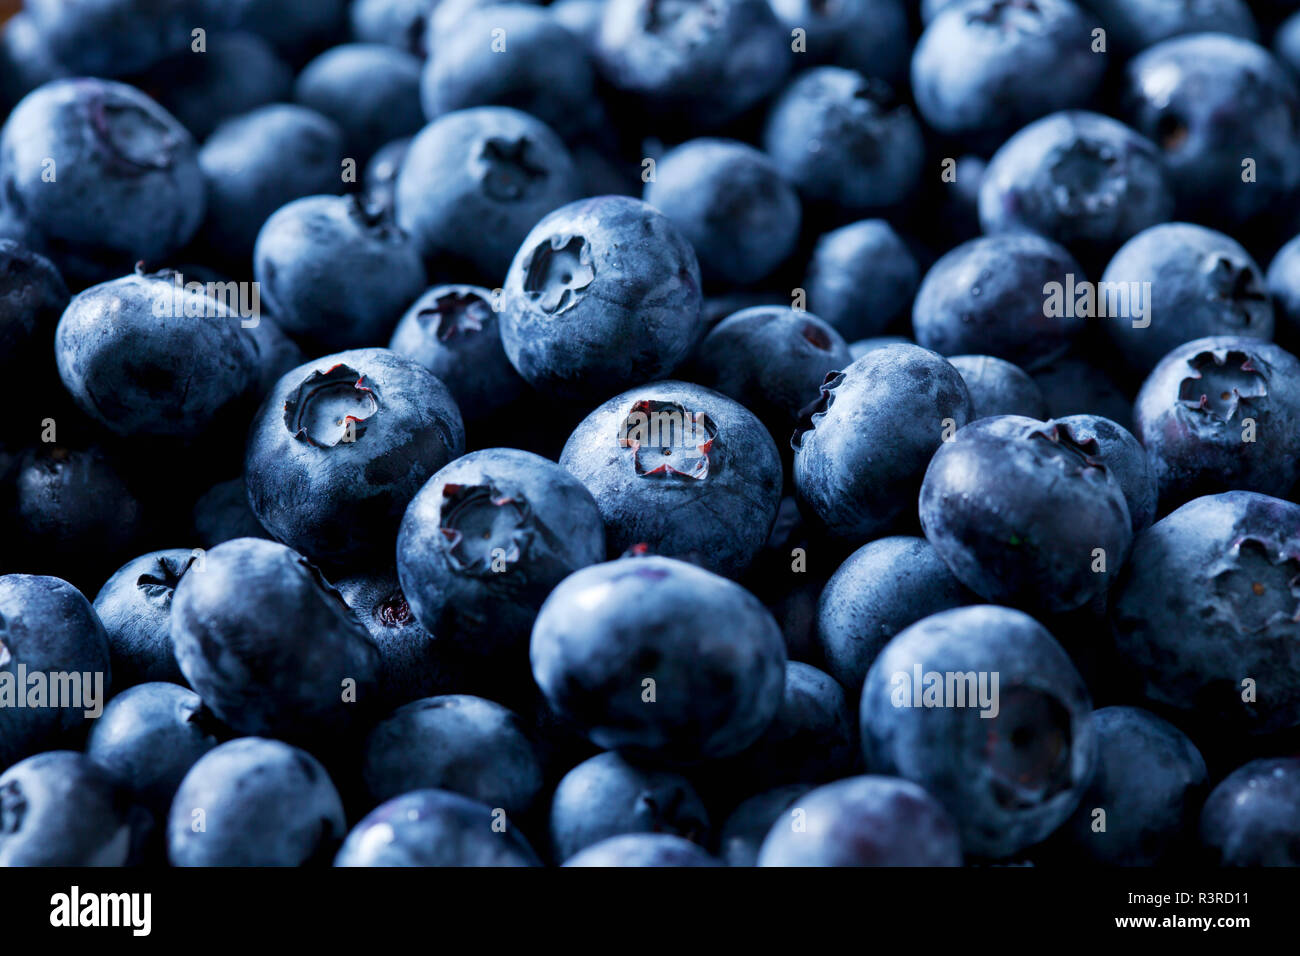 Blueberries, close-up Stock Photo